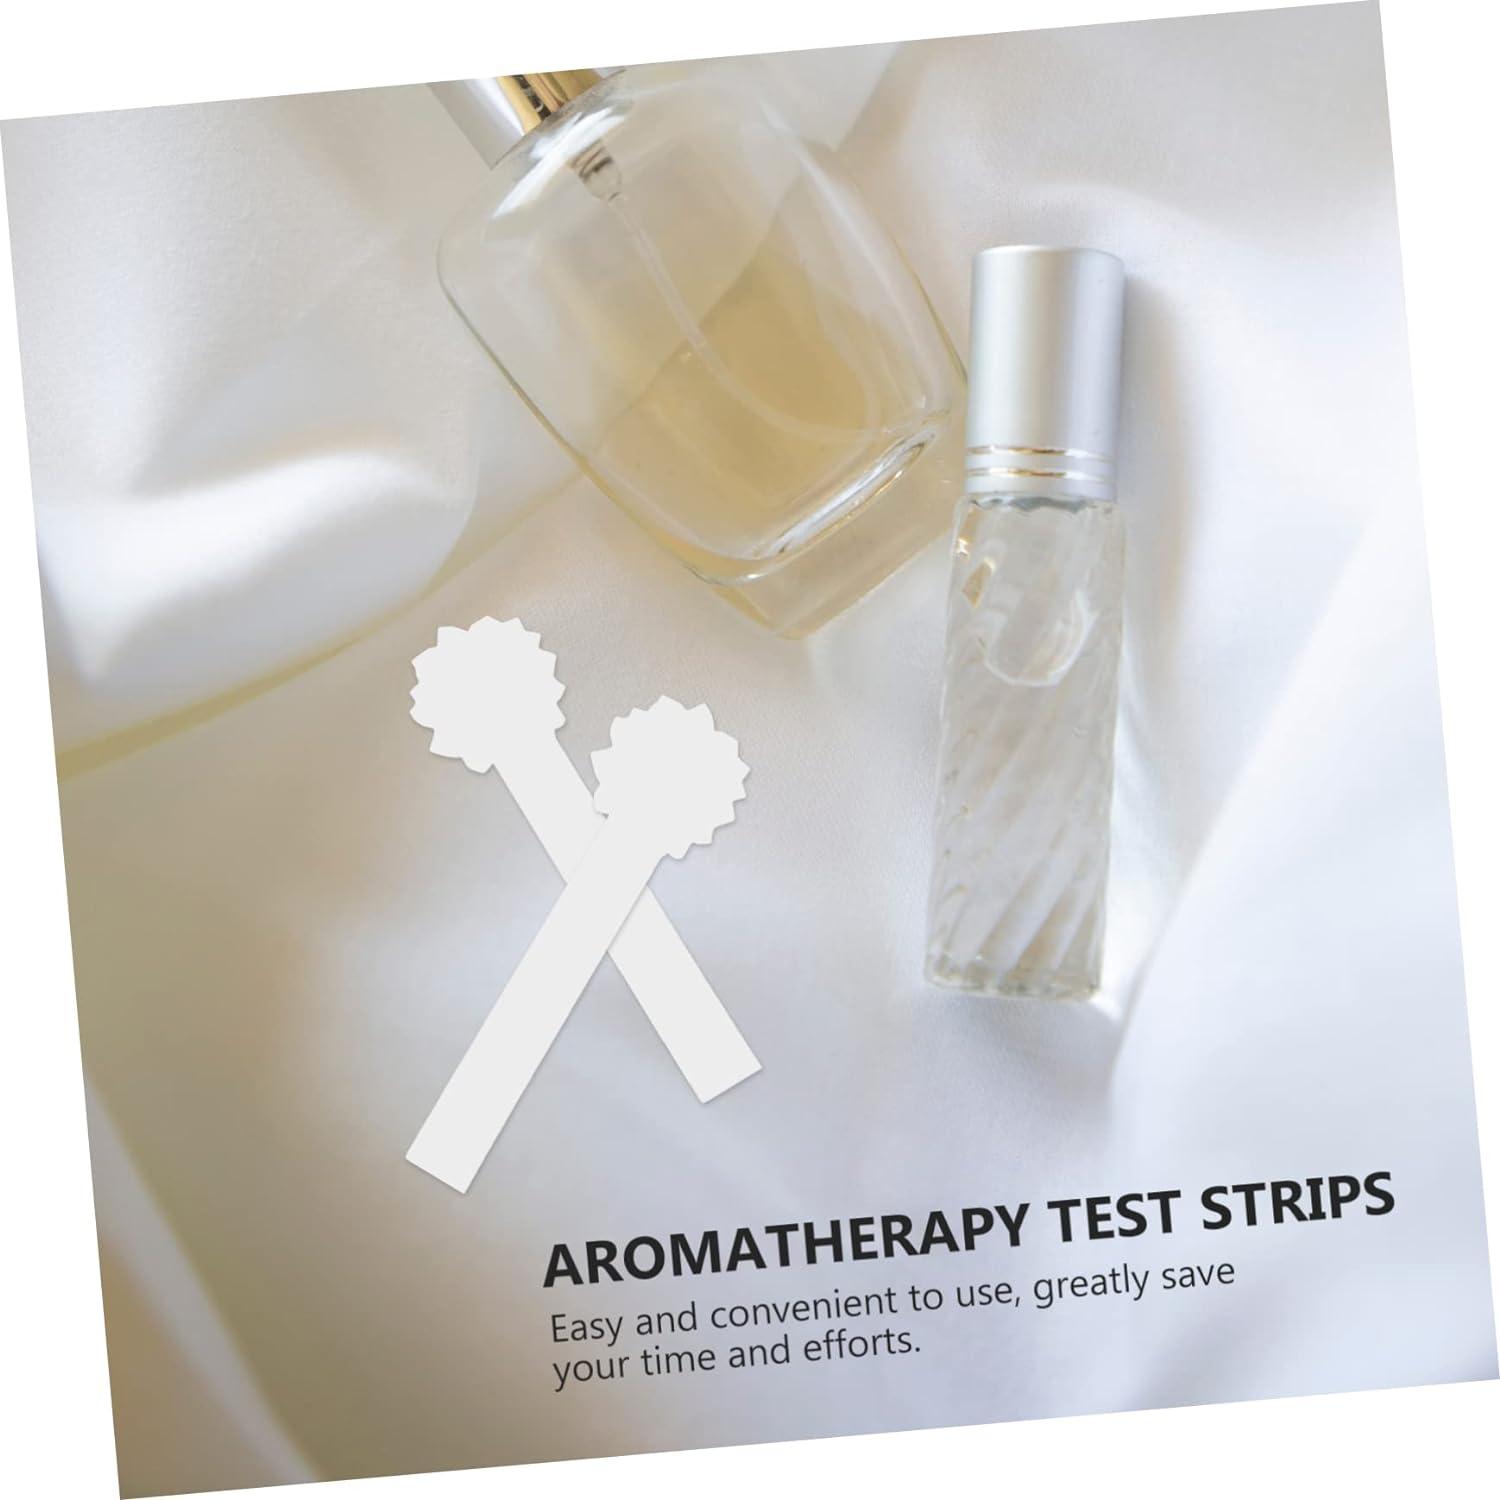  Memory Cross 12,000 Perfume Test Strips Printed with Company  Name and Logo Printed in Full Color - Premium Fragrance Test Strips for  Essential Oil and Scents : Health & Household